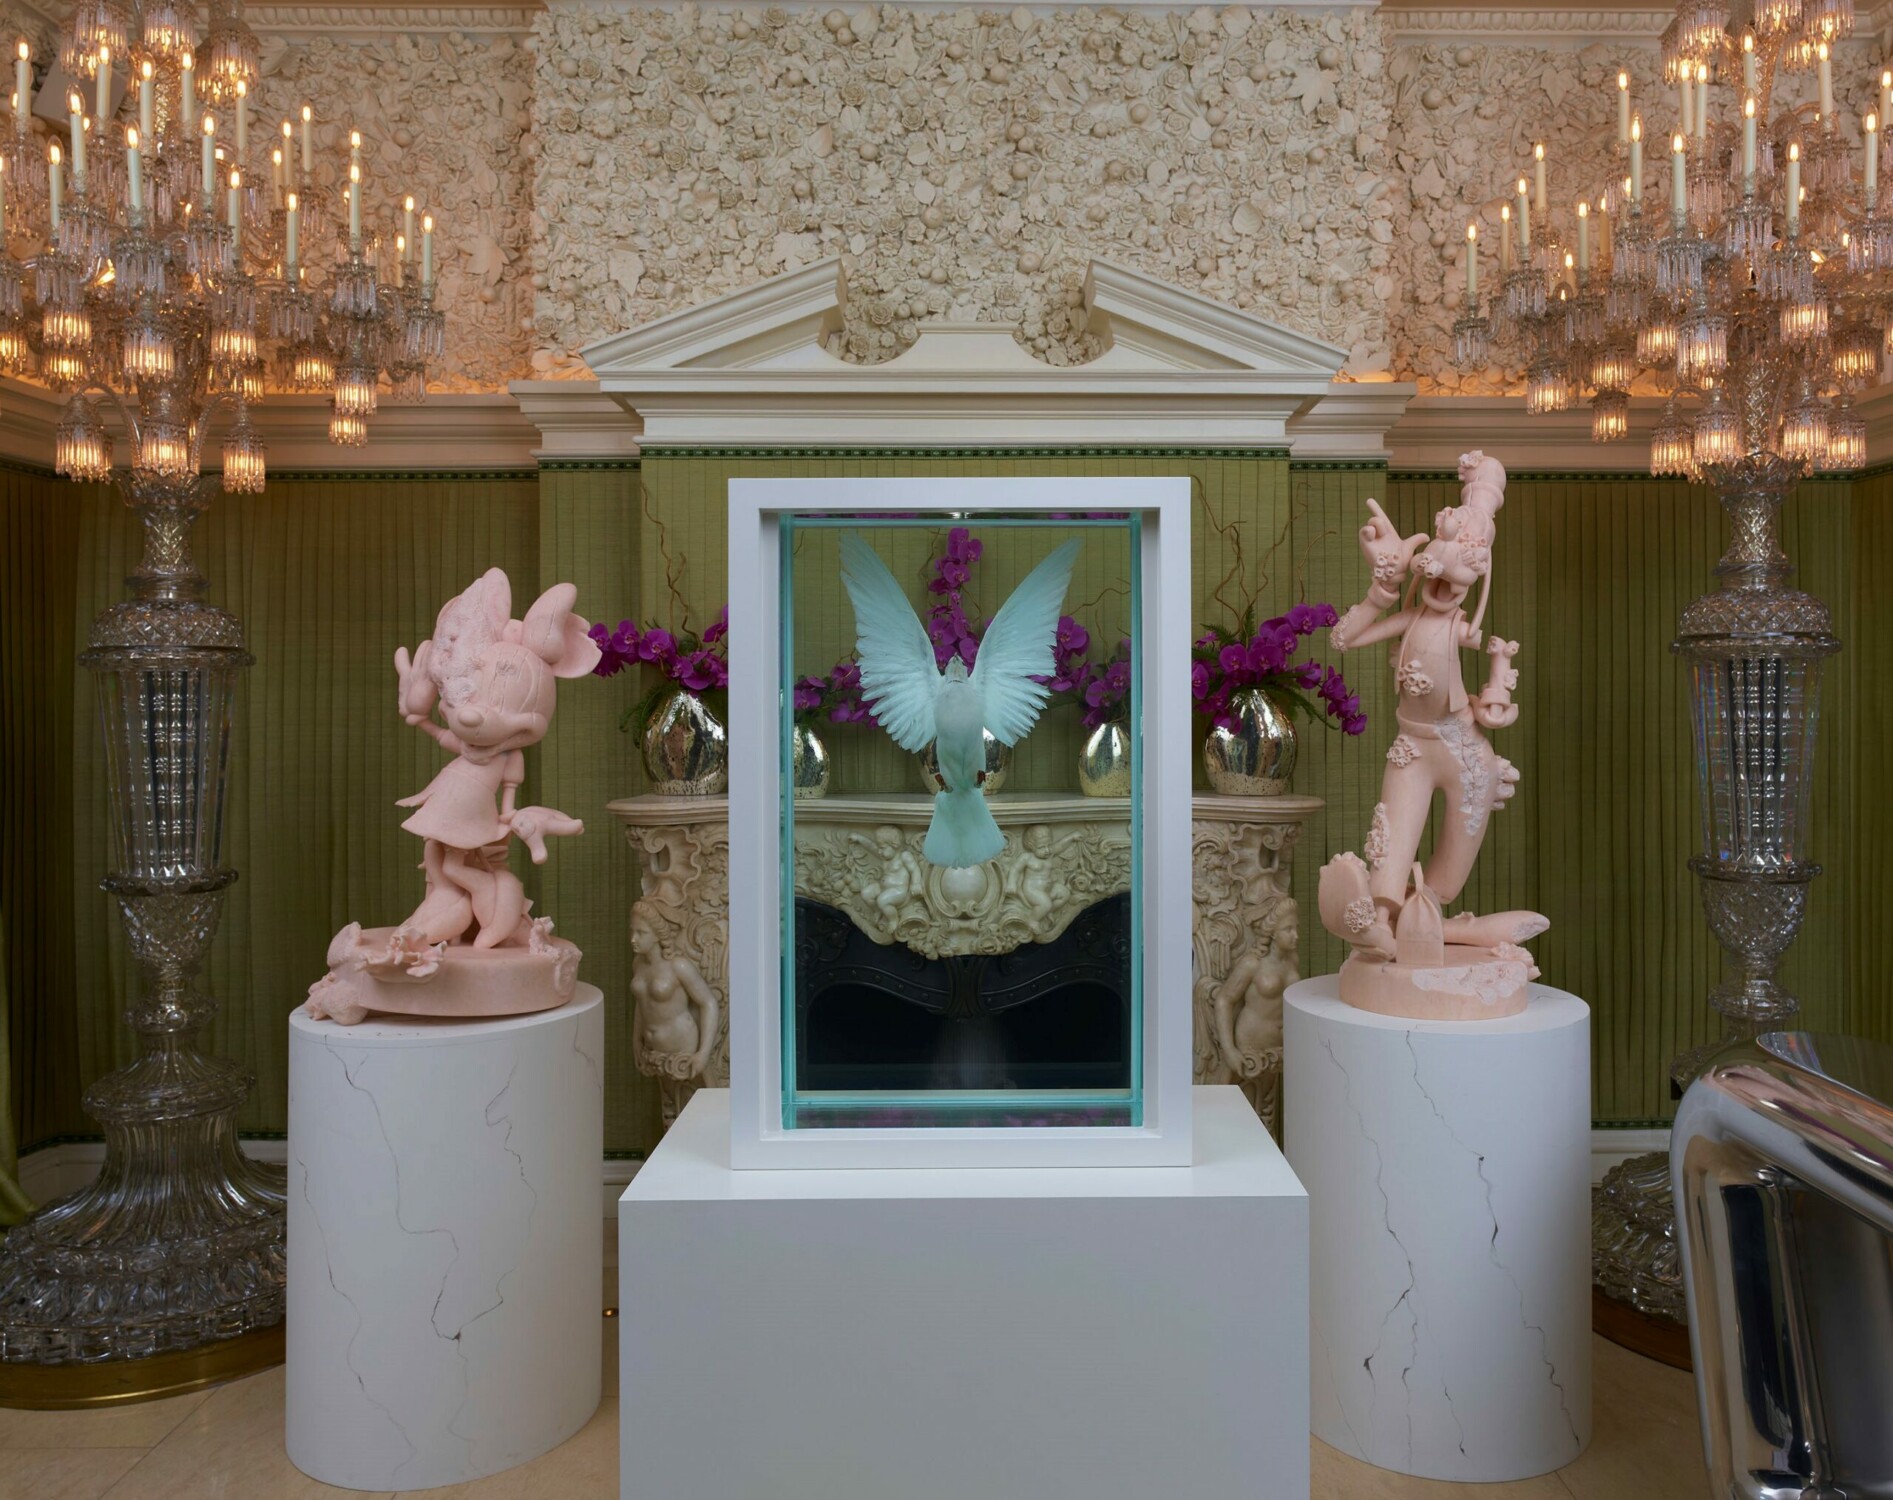 Installation View: Damien Hirst presentation at Annabel’s London. Photographed by Prudence Cuming Associates Ltd. © Damien Hirst and Science etc. All rights reserved, DACS 2021.